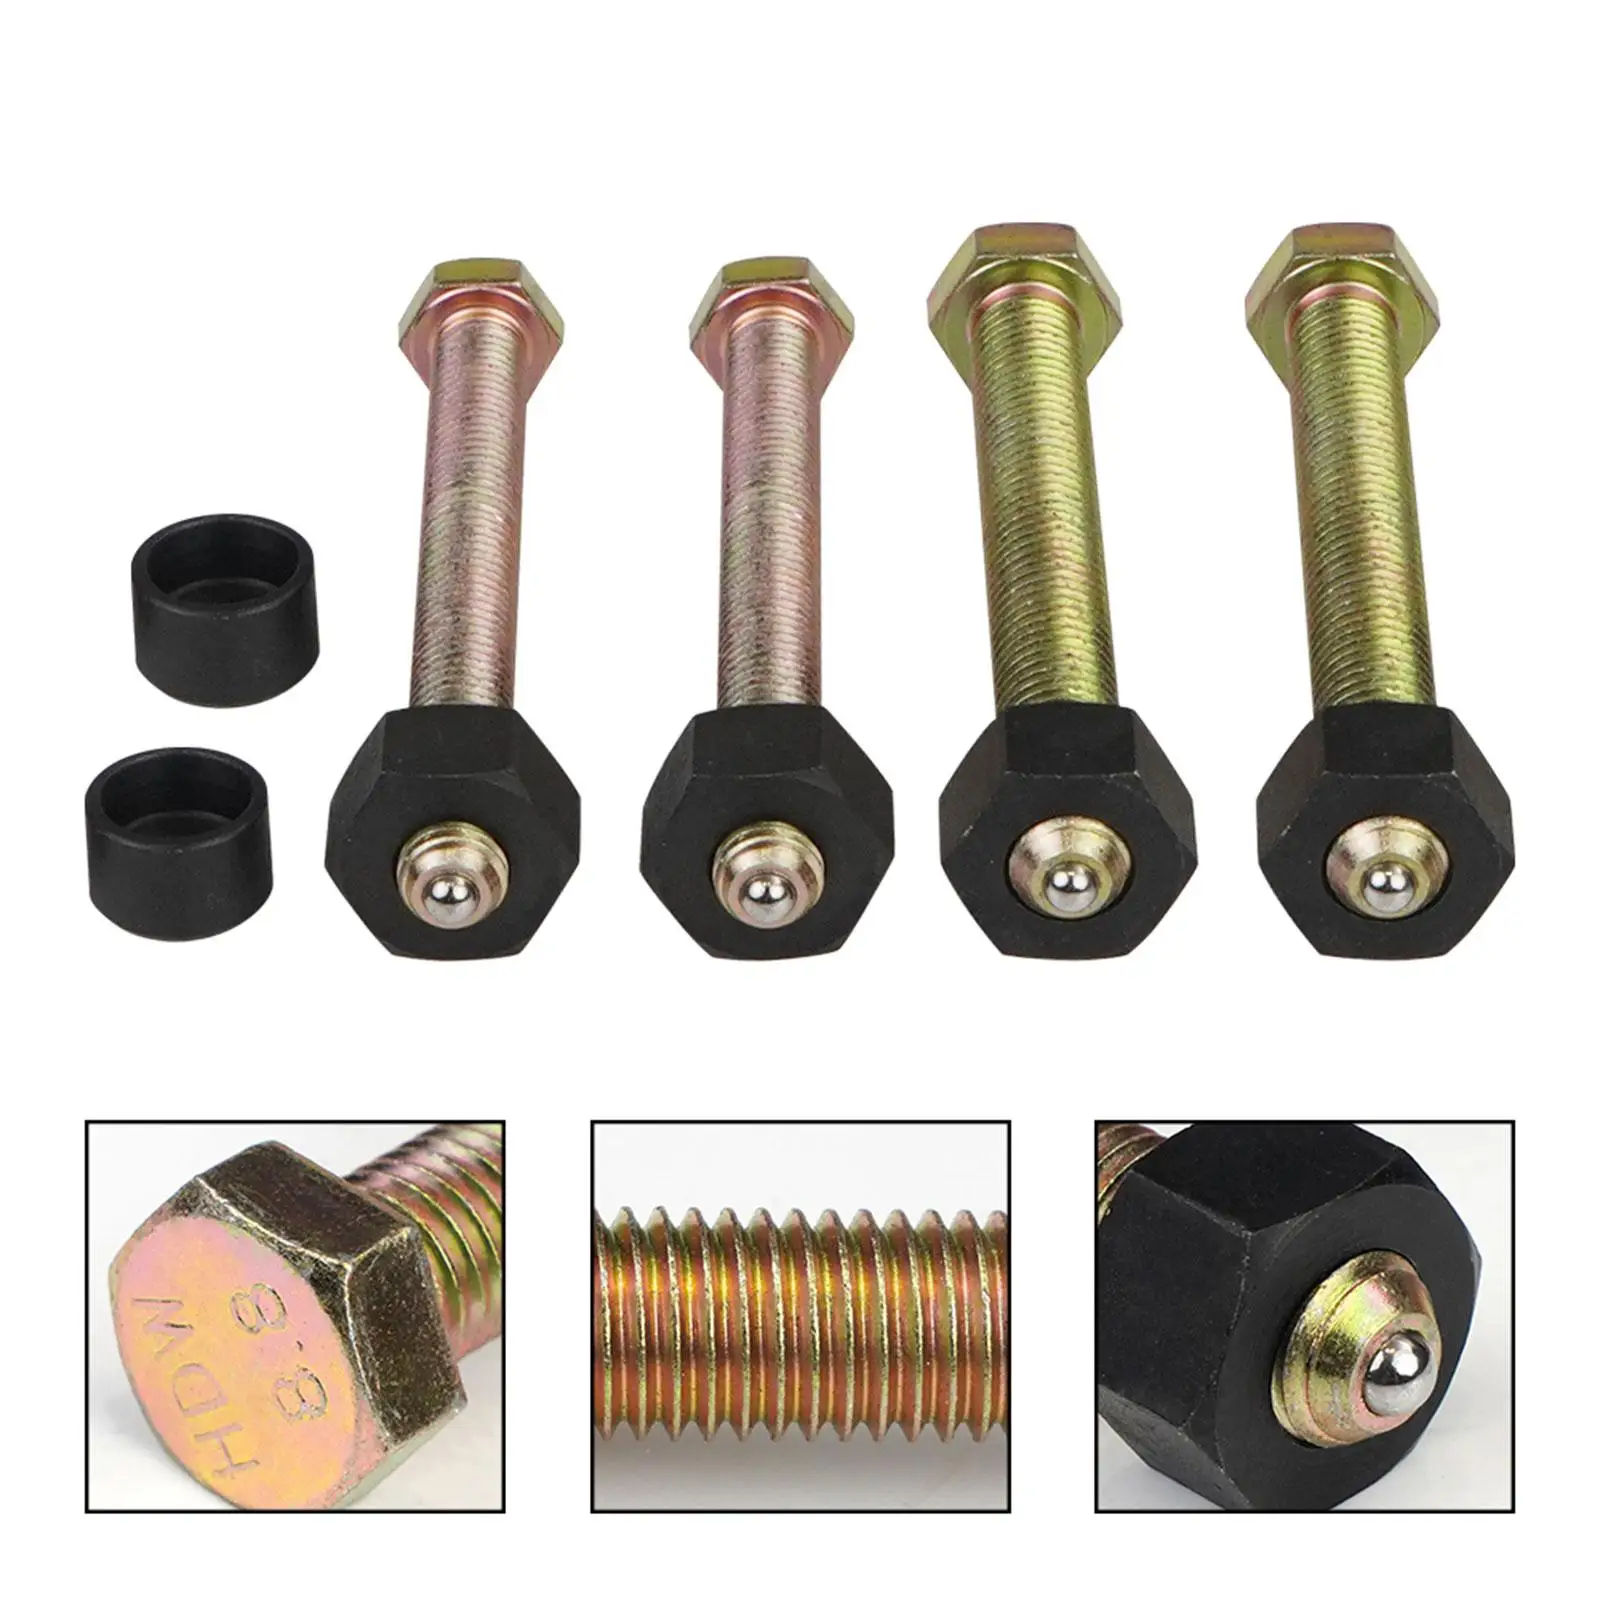 78834 Repair Parts Replacement Accessory Impact Rated Hub Removal Bolt Set